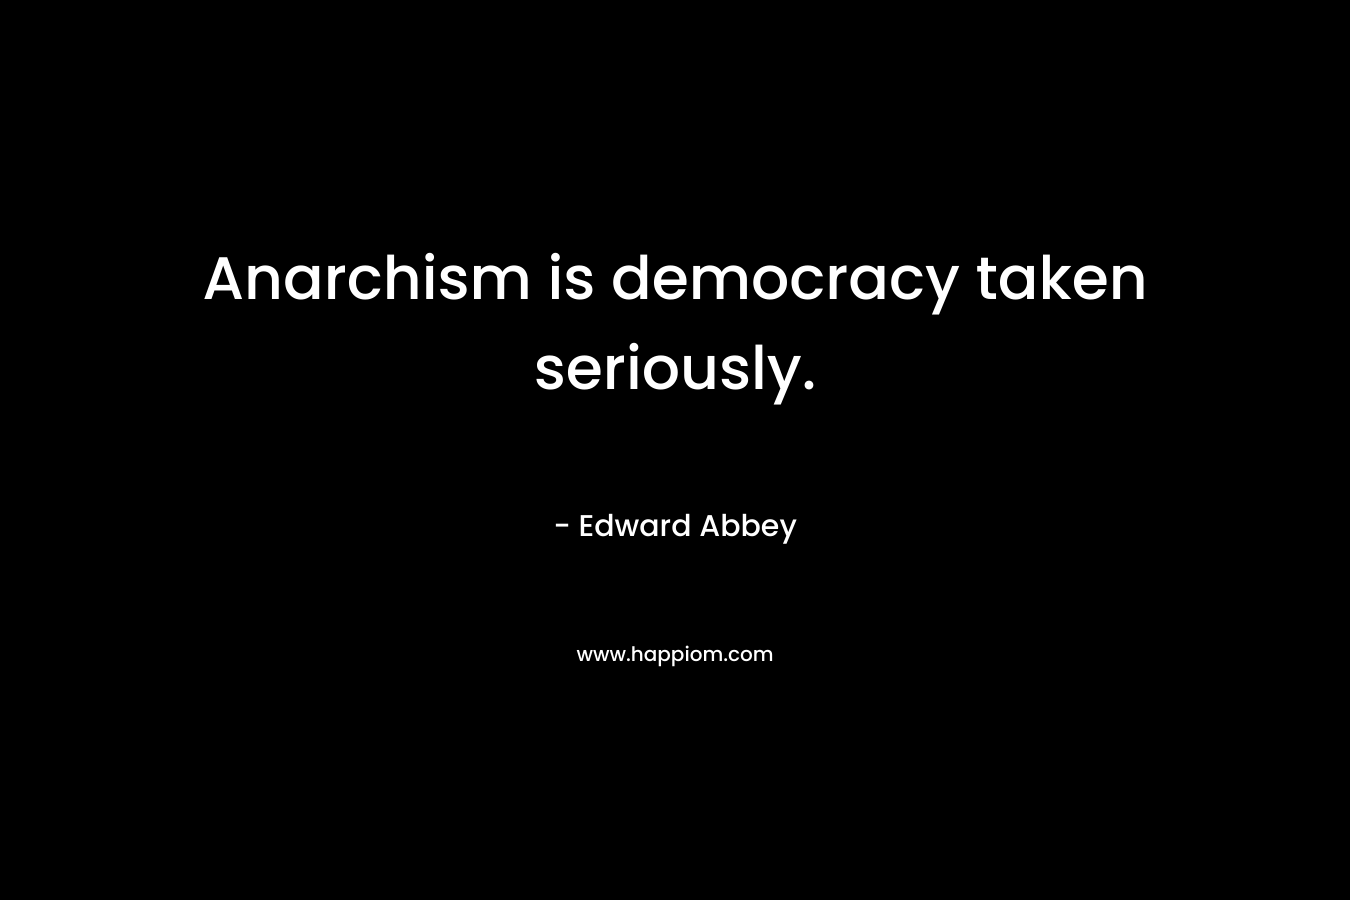 Anarchism is democracy taken seriously.